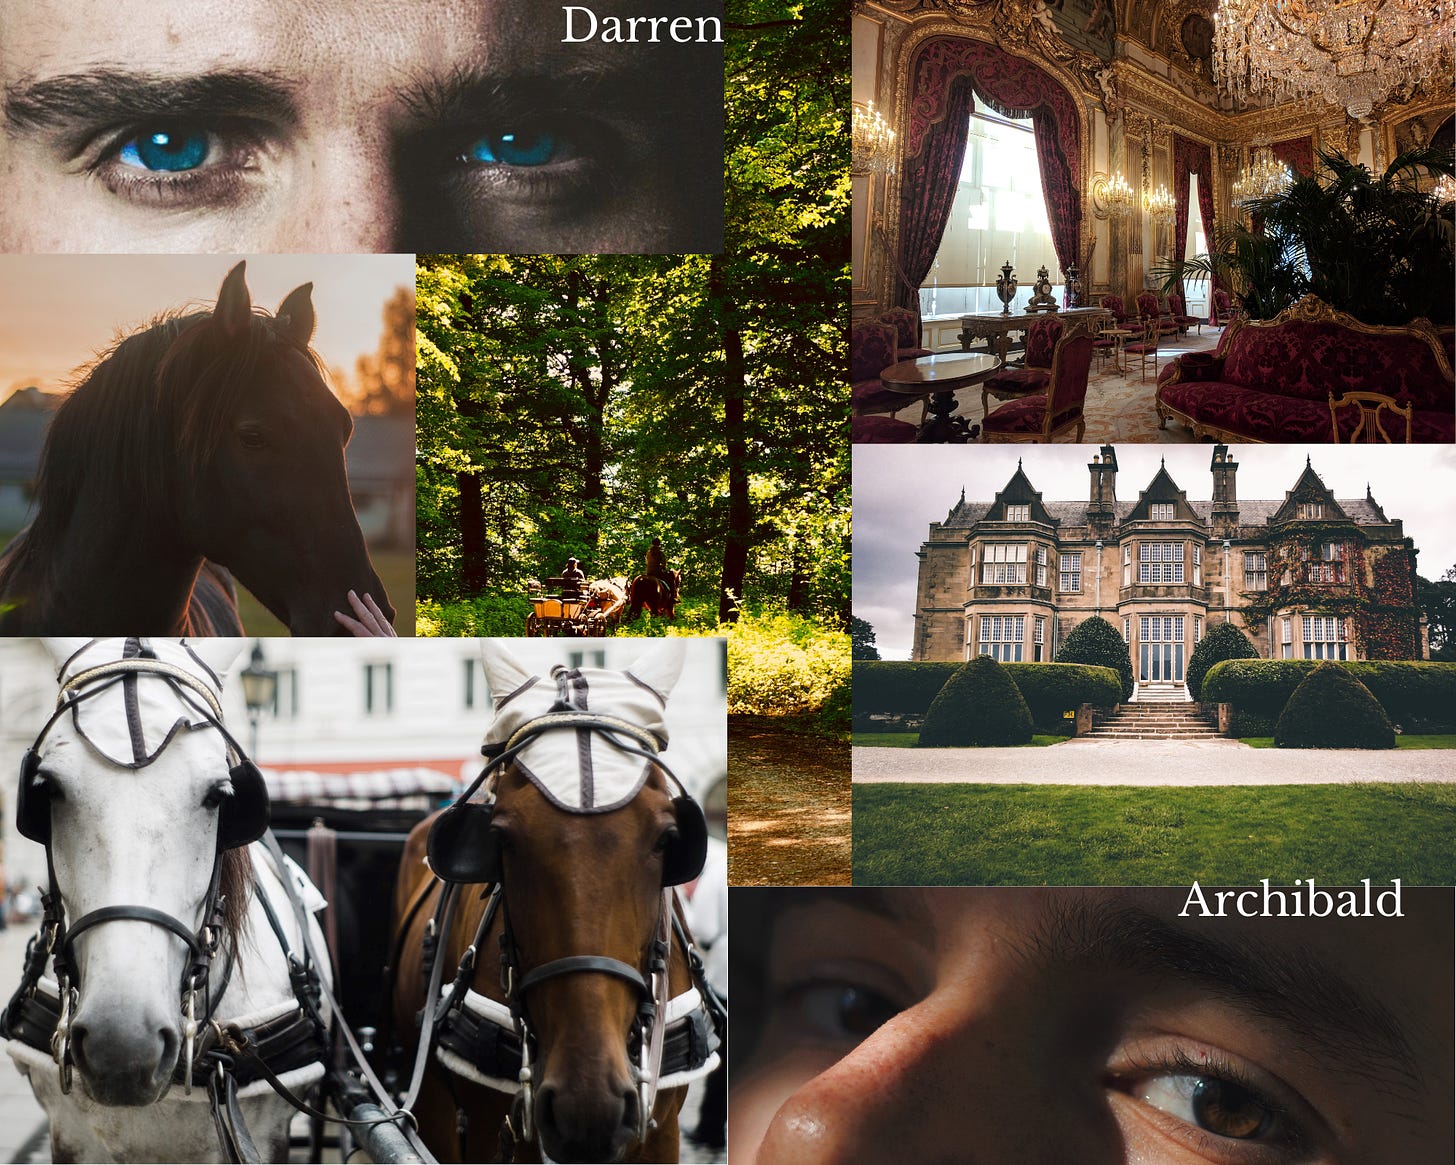 pic collage for my book set in19th century England. On a forest path background top right a man's blue eyes, a black horse, two horses in a carriage, an elegant living room, a mansion a man's brown eyes. the characters are Archie and Darren.